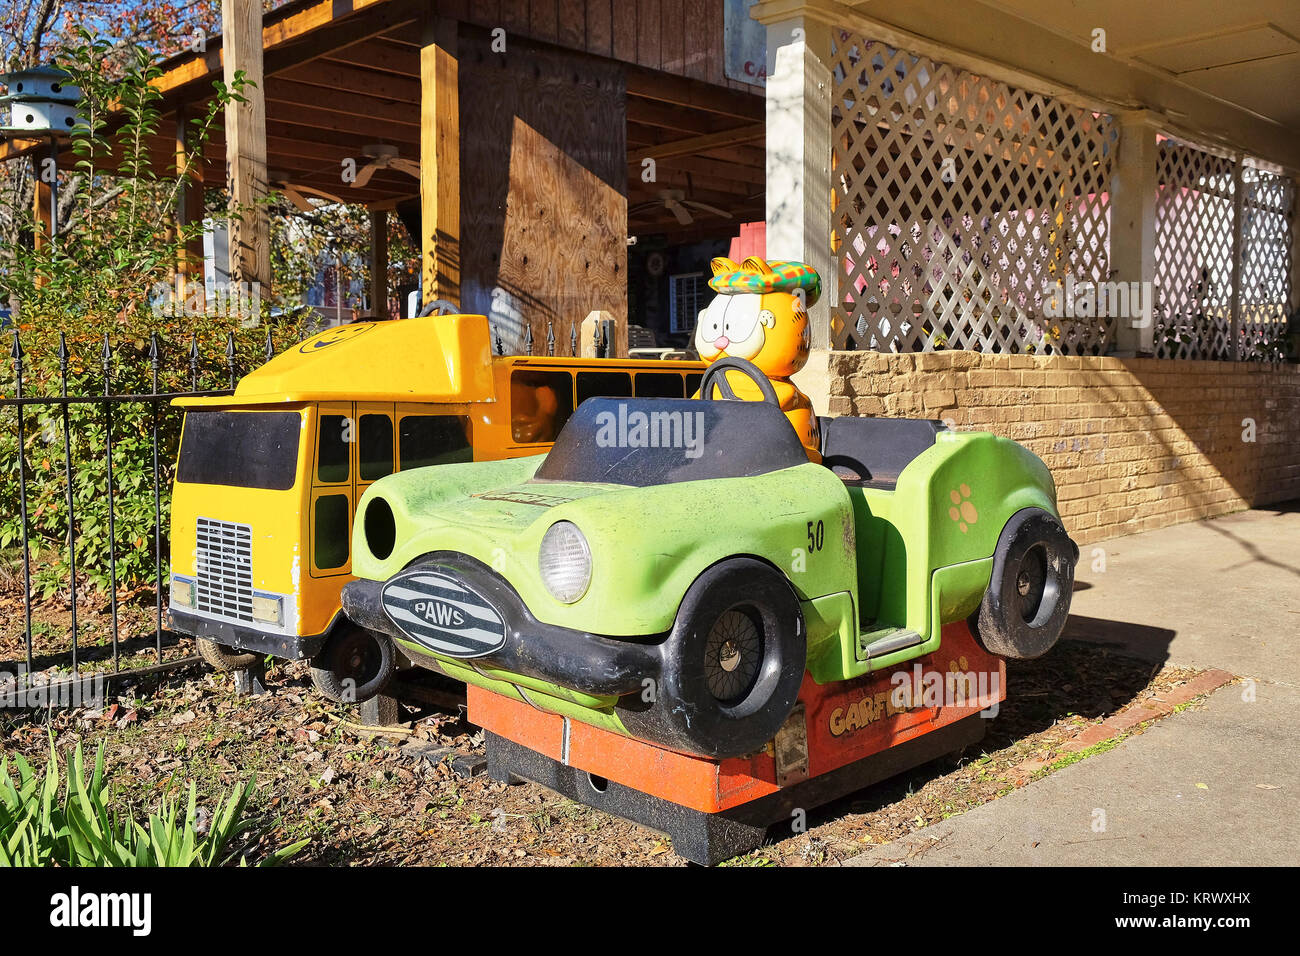 Old discarded children's amusement rides, Garfield Car, and a yellow fire truck, sit abandoned behind closed businesses in a rural Georgia town, USA. Stock Photo